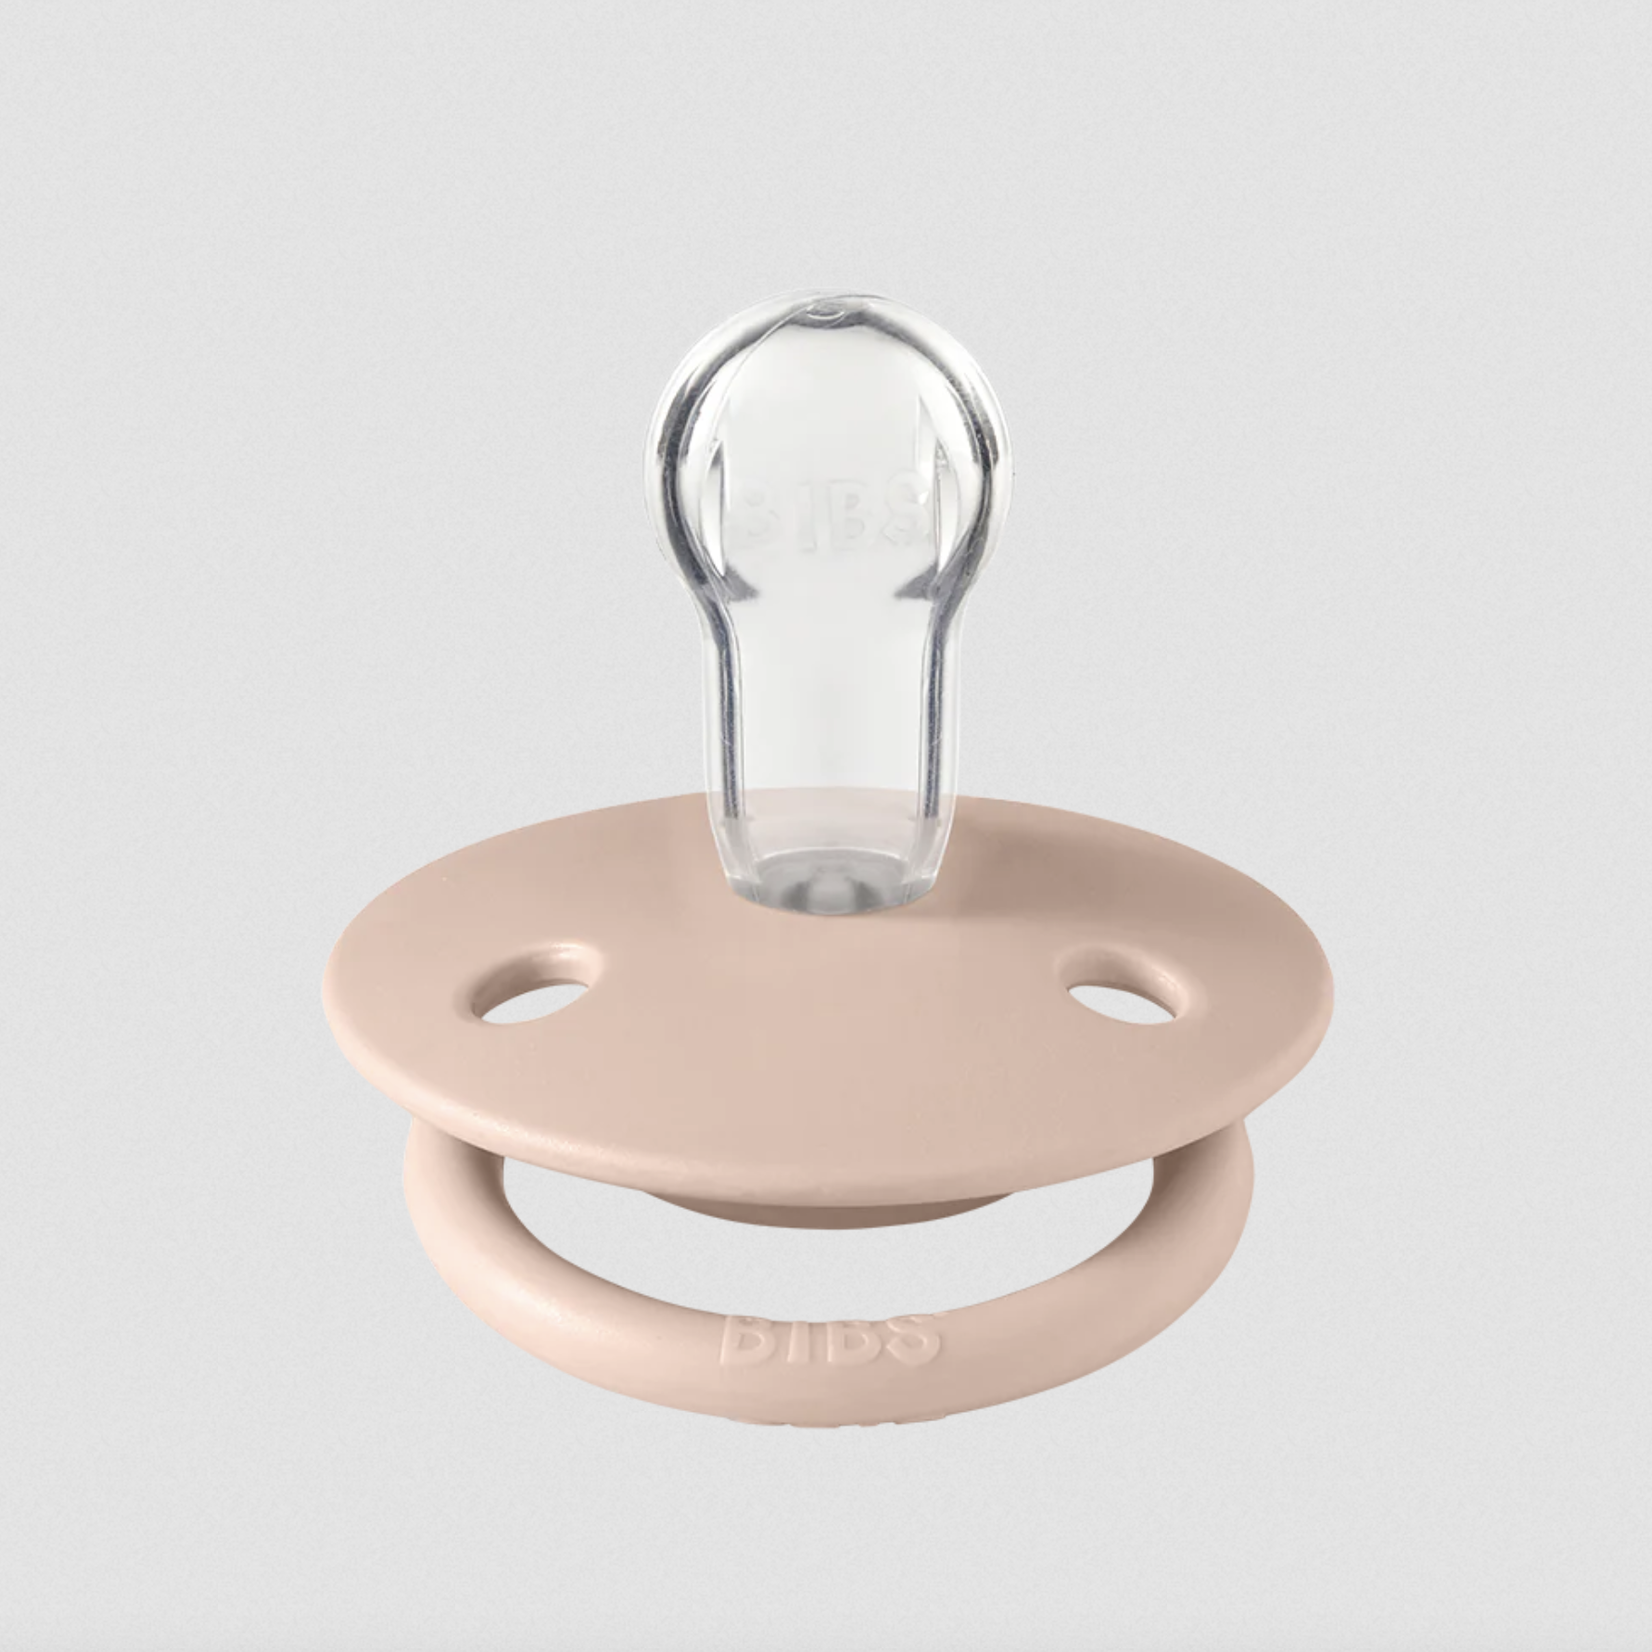 BIBS De Lux|Silicone One Size Ivory/Blush